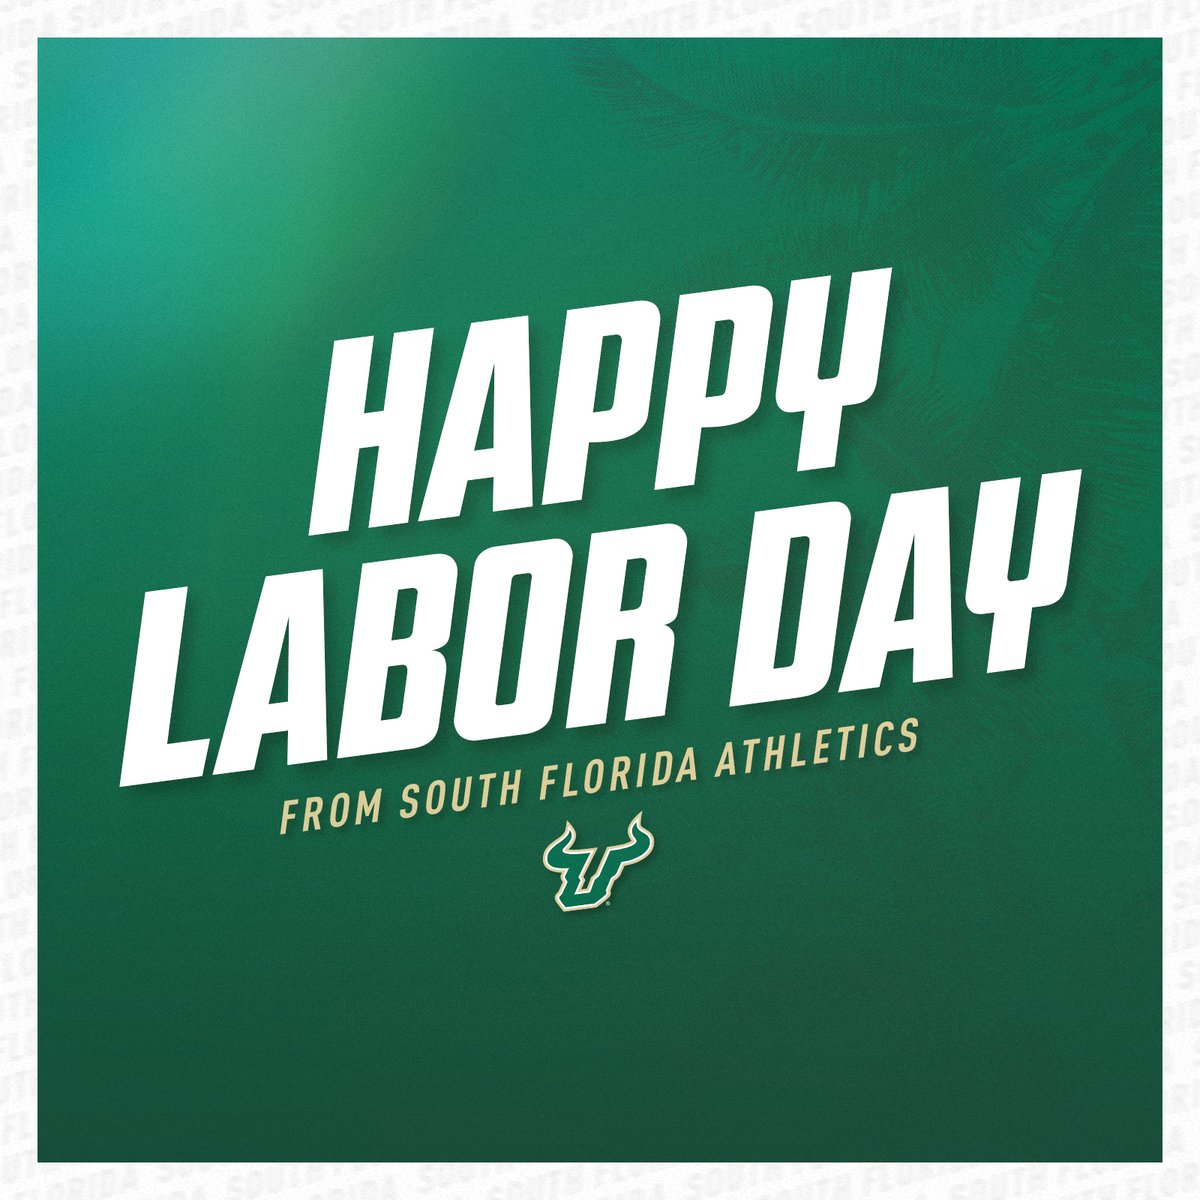 Happy Labor Day from USF Baseball! #HornsUp🤘 | #CarryTheBoat